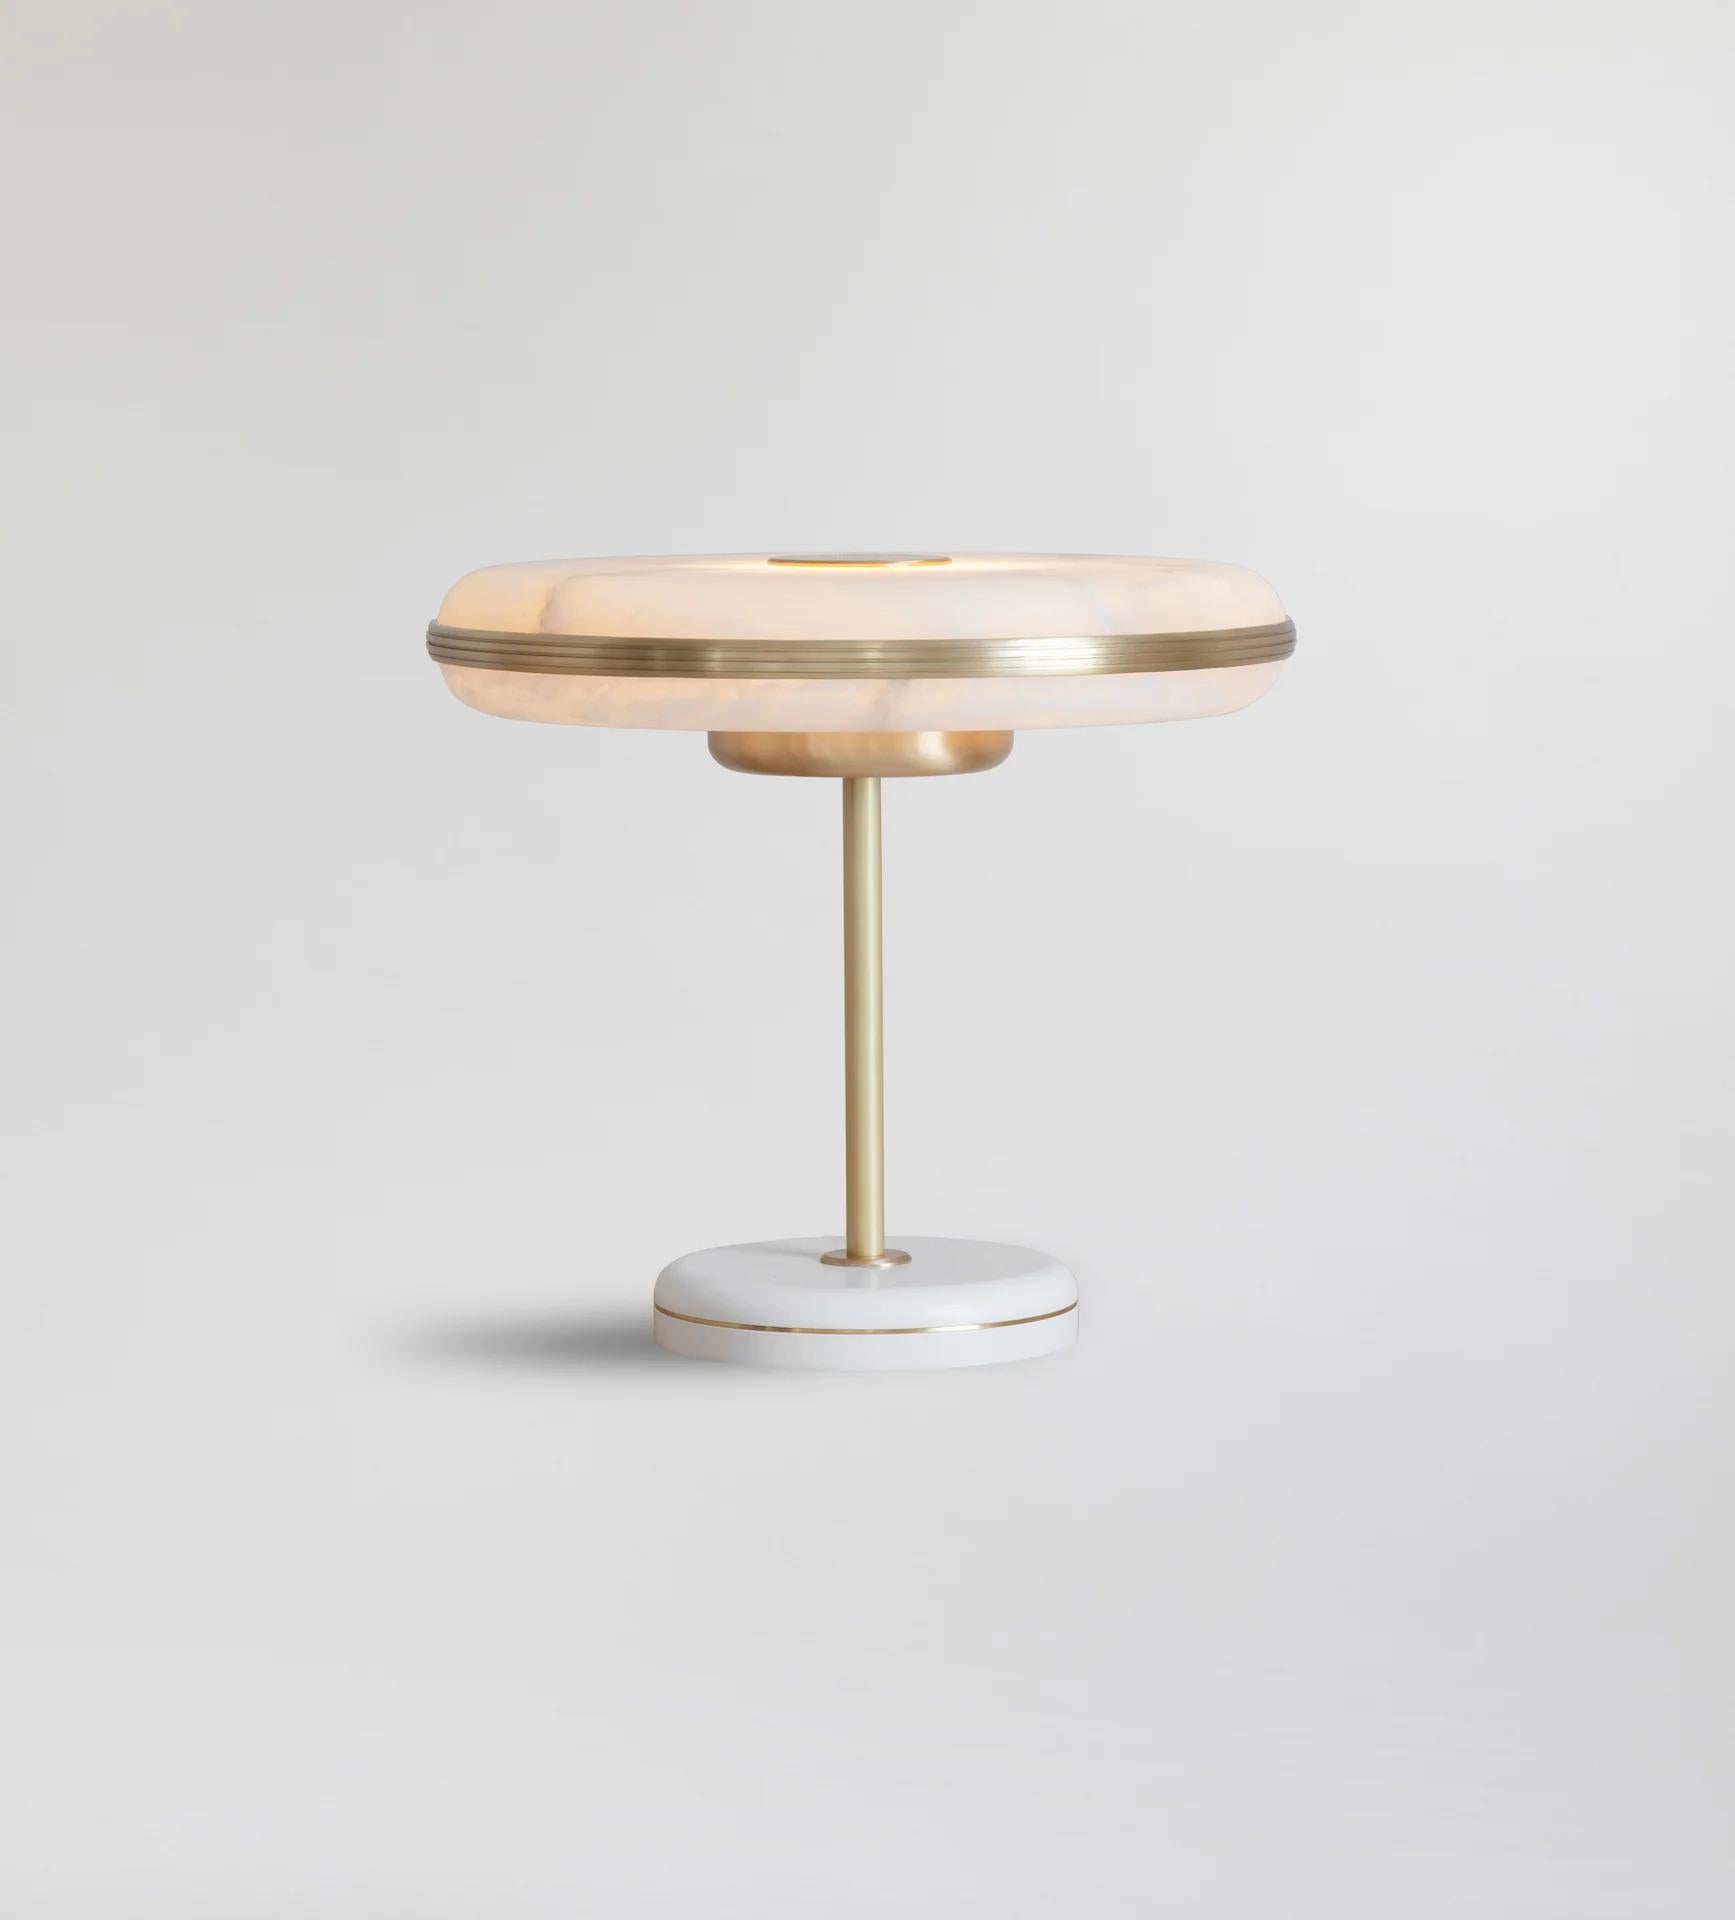 Beran Brushed Brass Large Table Lamp by Bert Frank
Dimensions: Ø 36 x H 32 cm.
Materials: Brass and alabaster.
Base finish: Satin white.

Available in two different sizes. Available in different finishes and materials. Please contact us. 

The